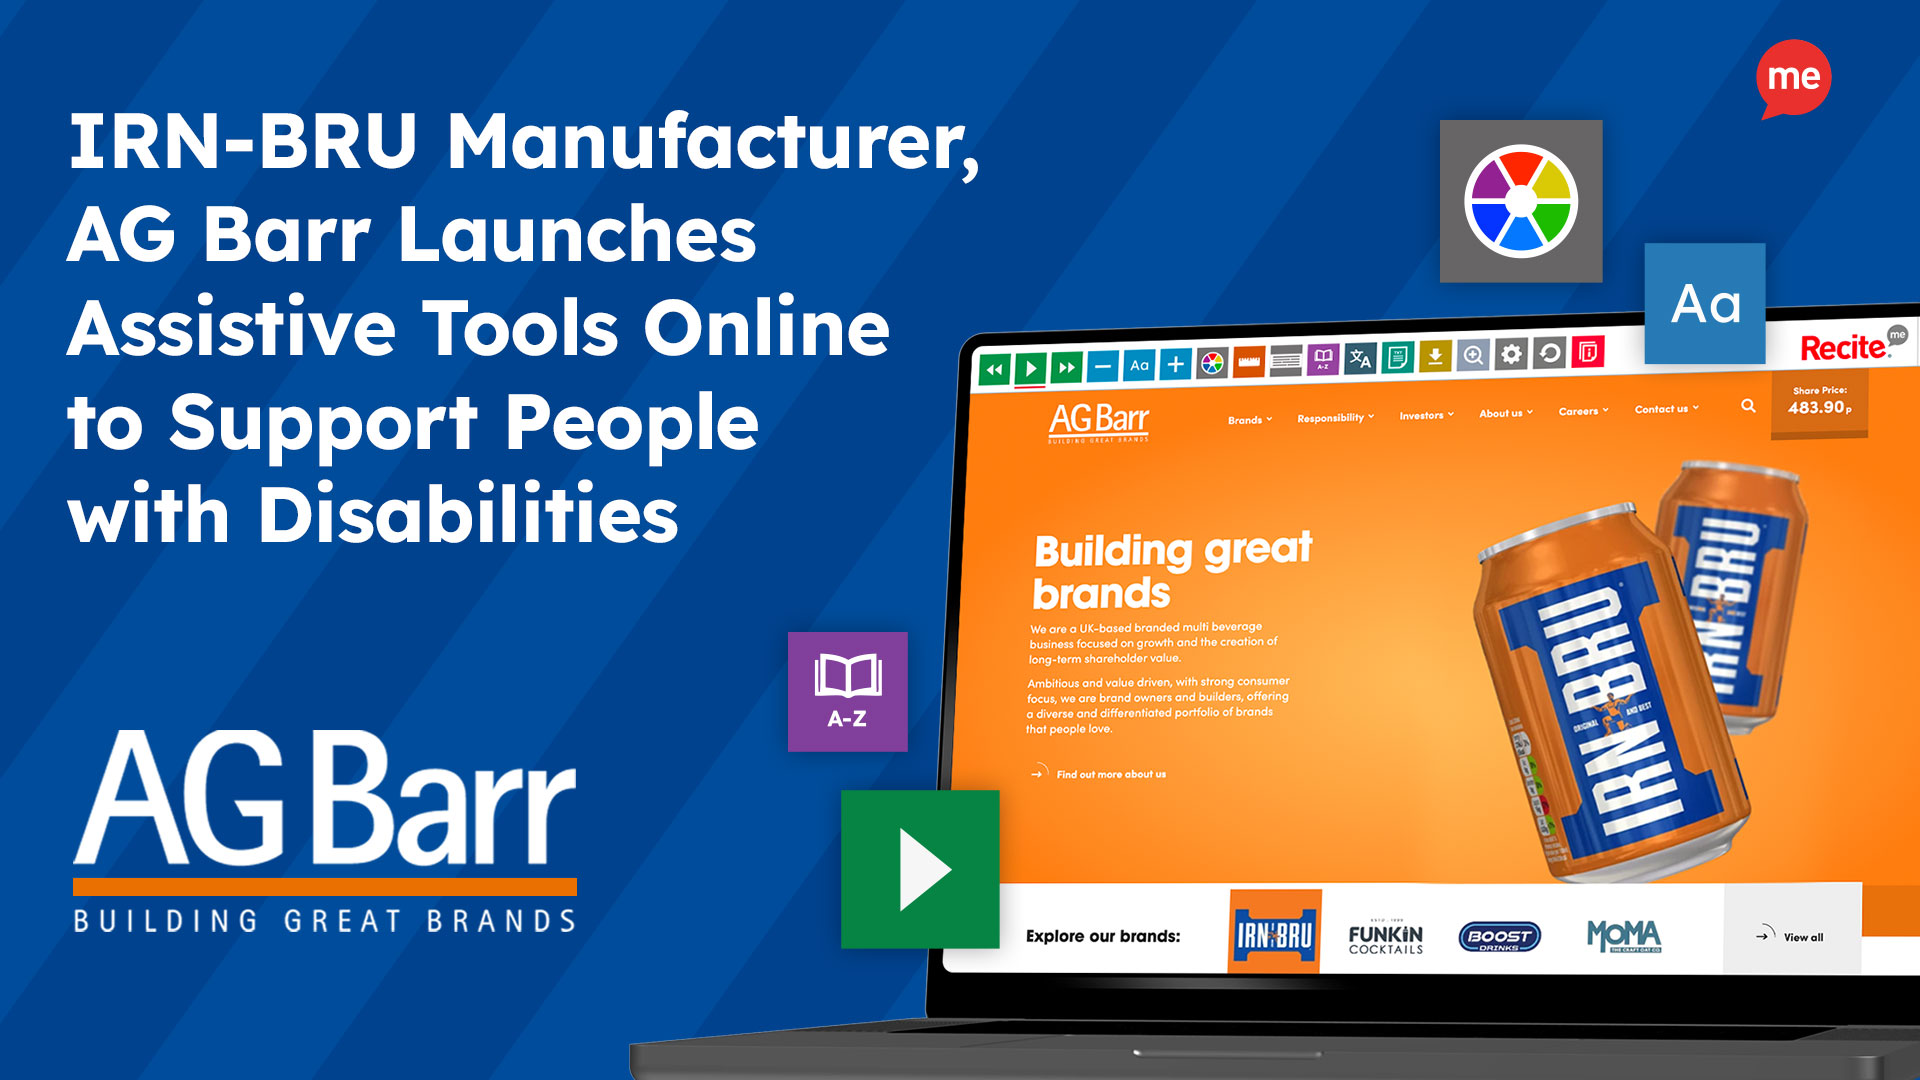 IRN-BRU Manufacturer, AG Barr launches assistive tools online to support people with disabilities.